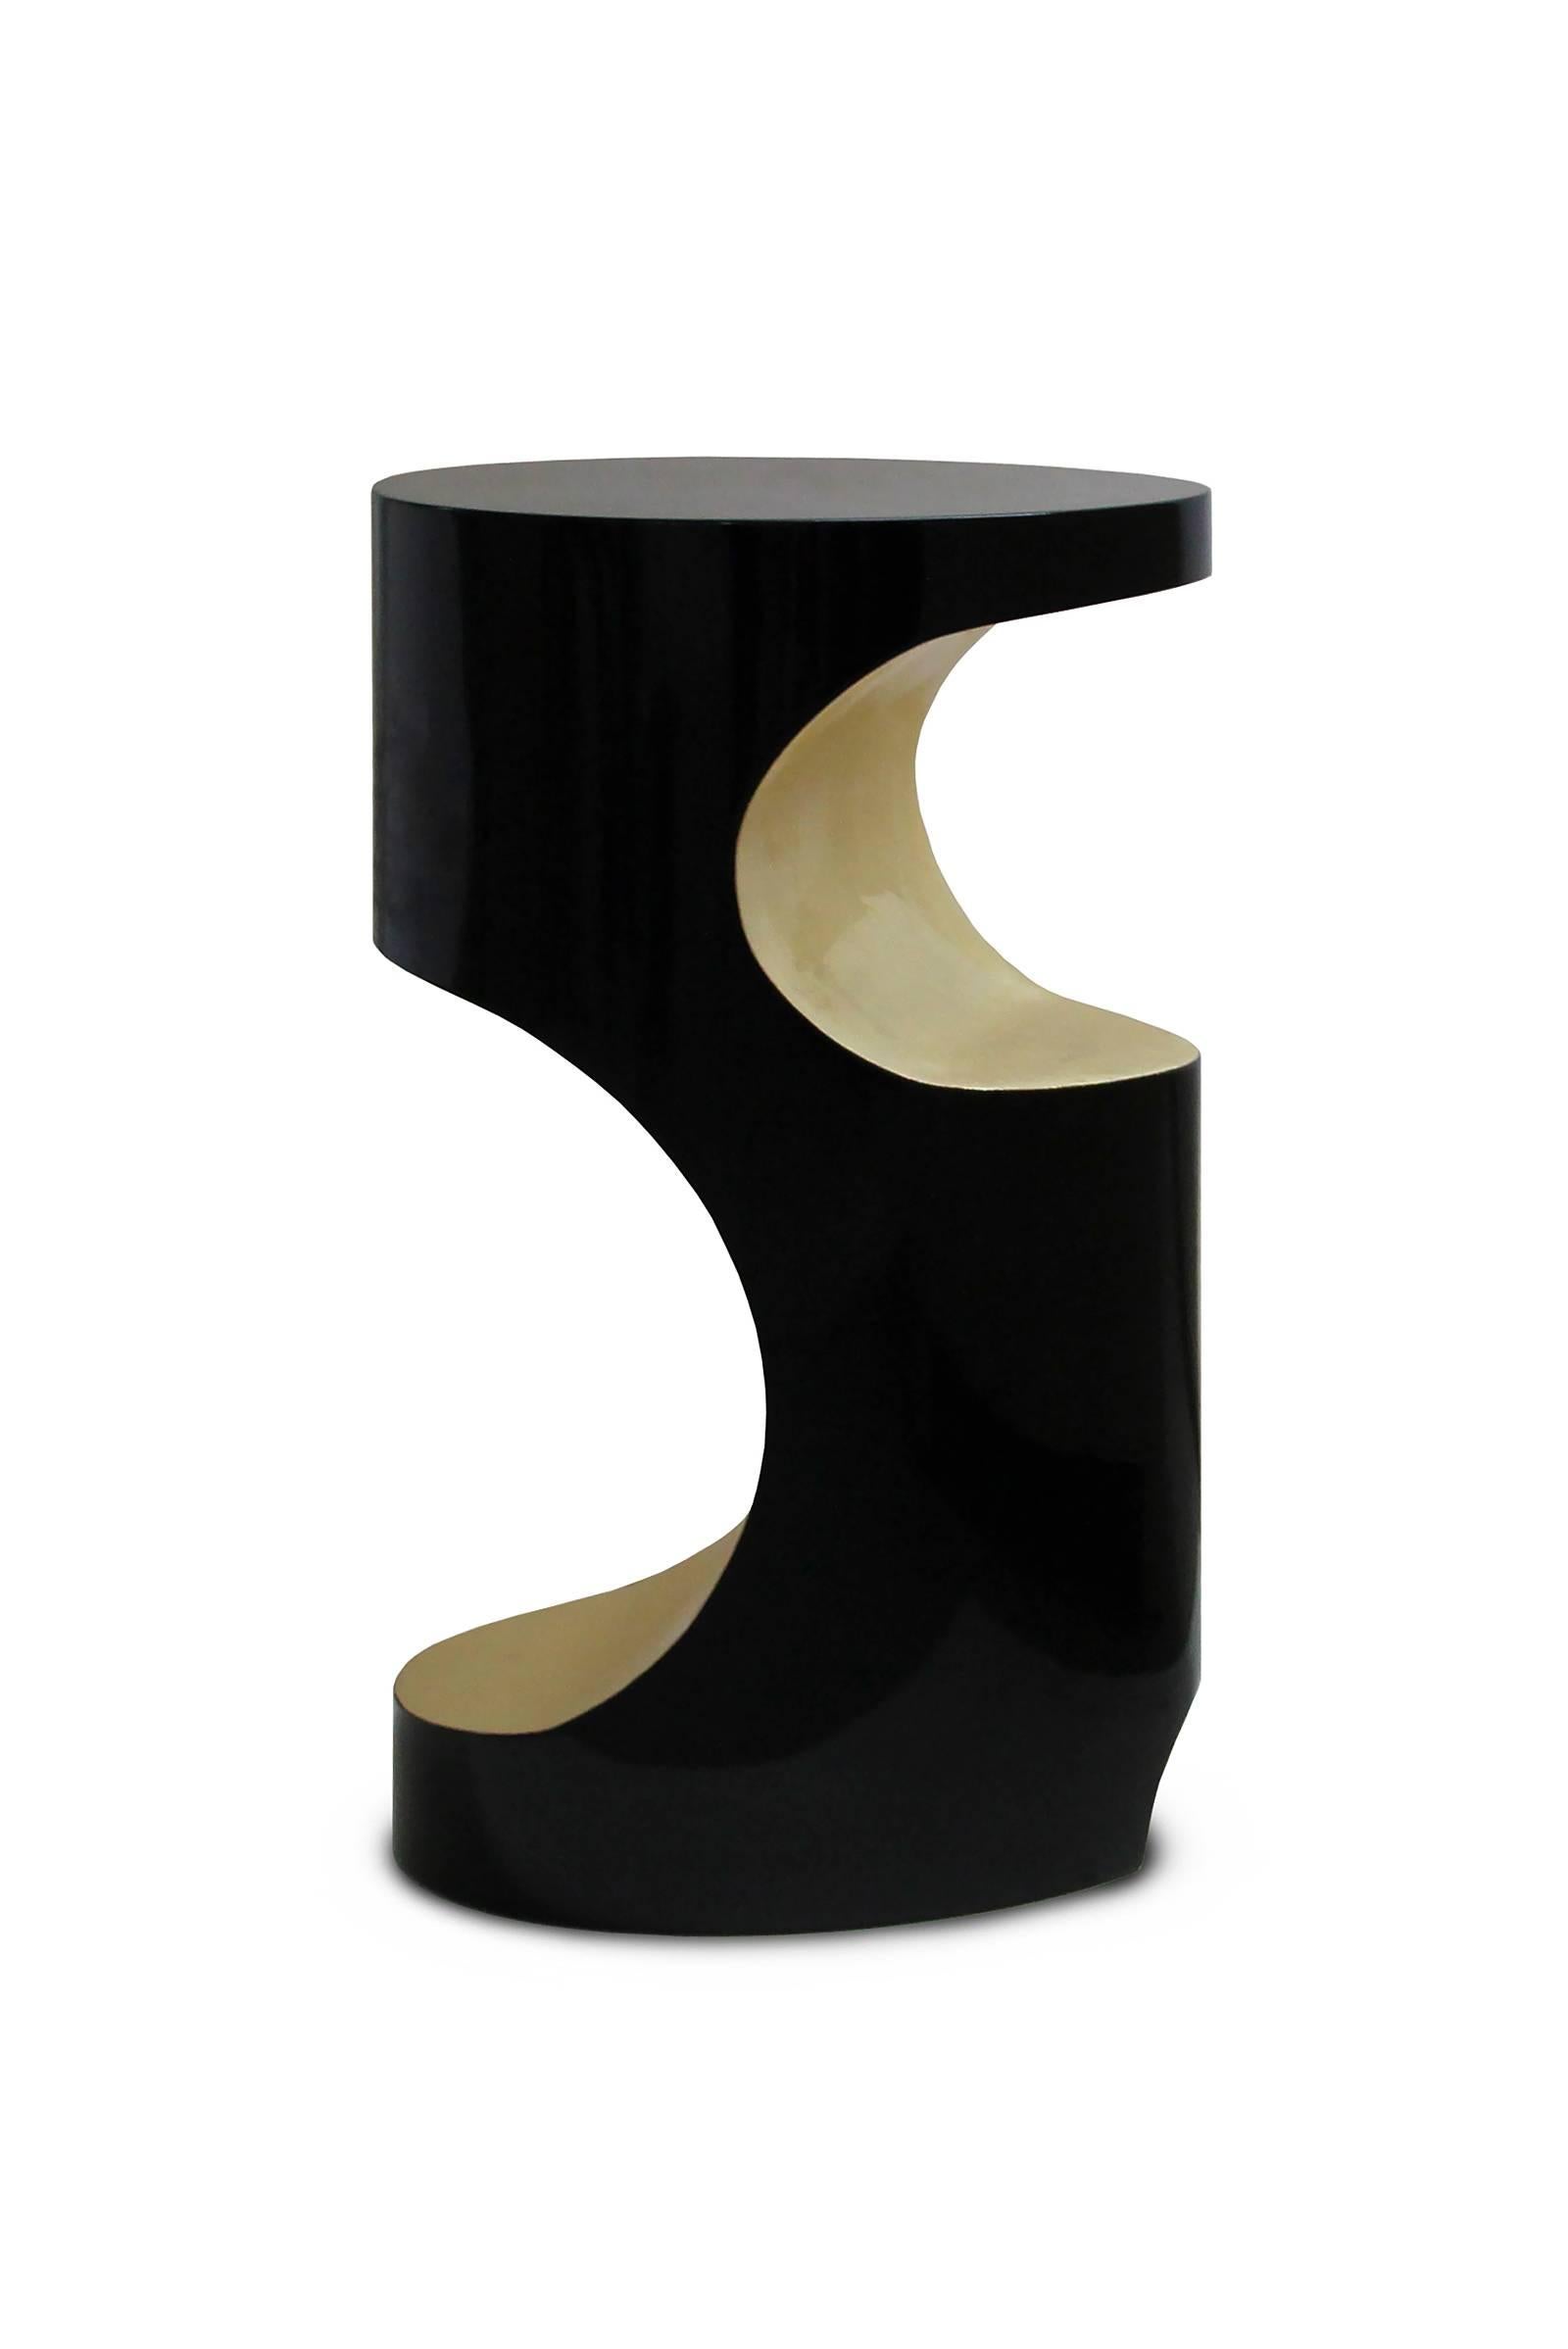 Oval side table Felix with body and top made with fiberglass.
in high glossy black lacquer and high glossy golden leaf finish.


        